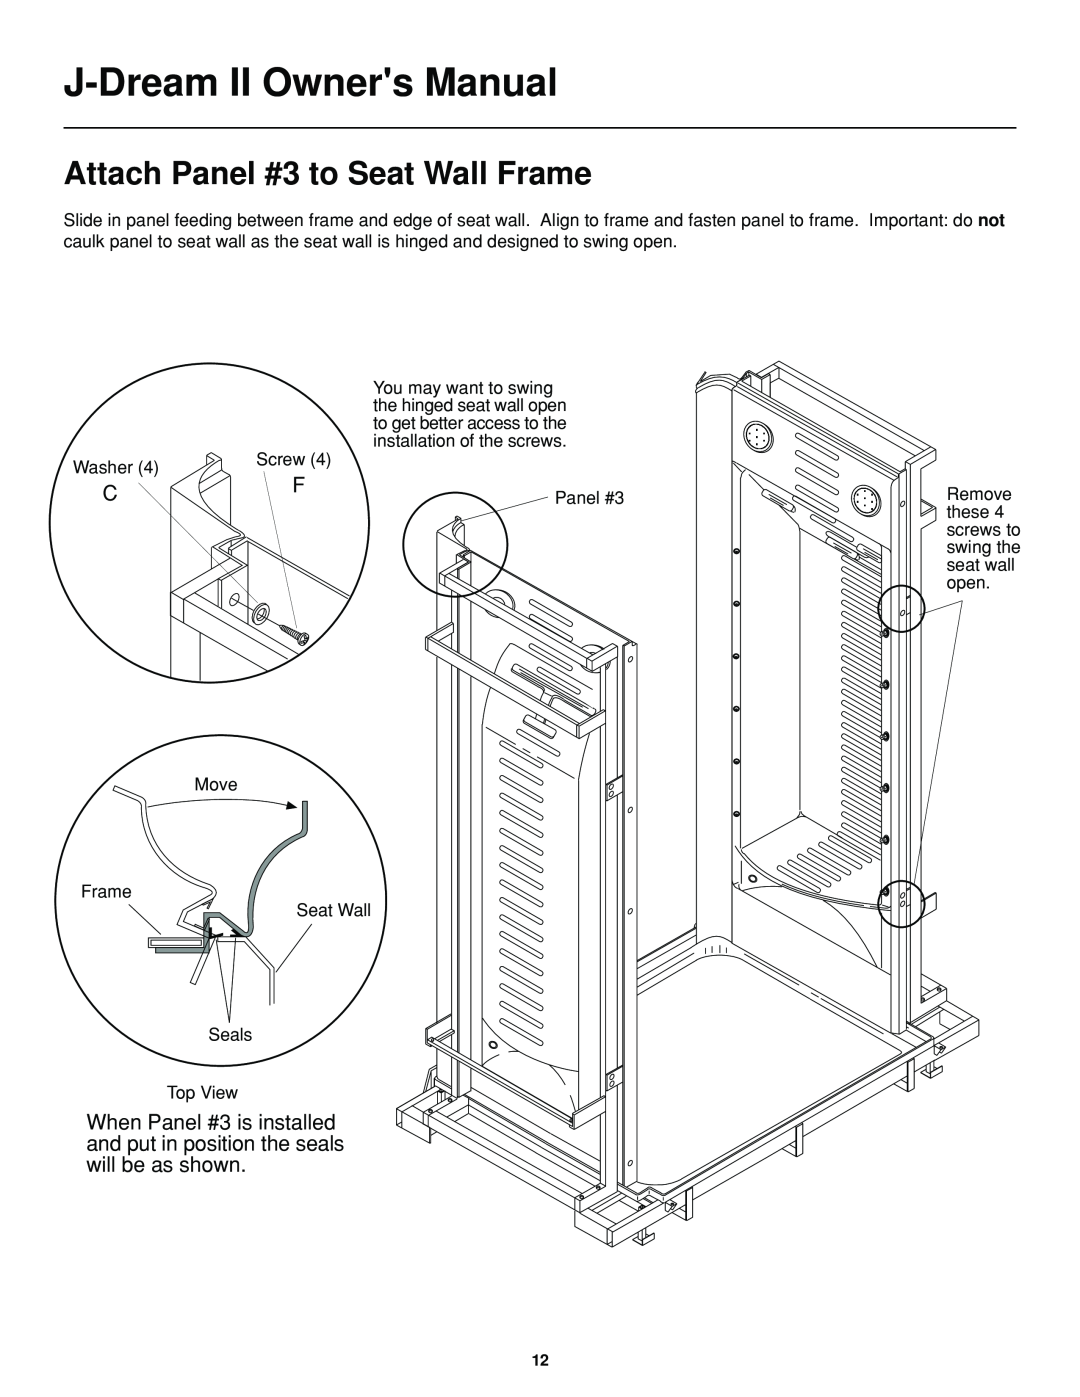 Jacuzzi J-DREAM II owner manual Attach Panel #3 to Seat Wall Frame 